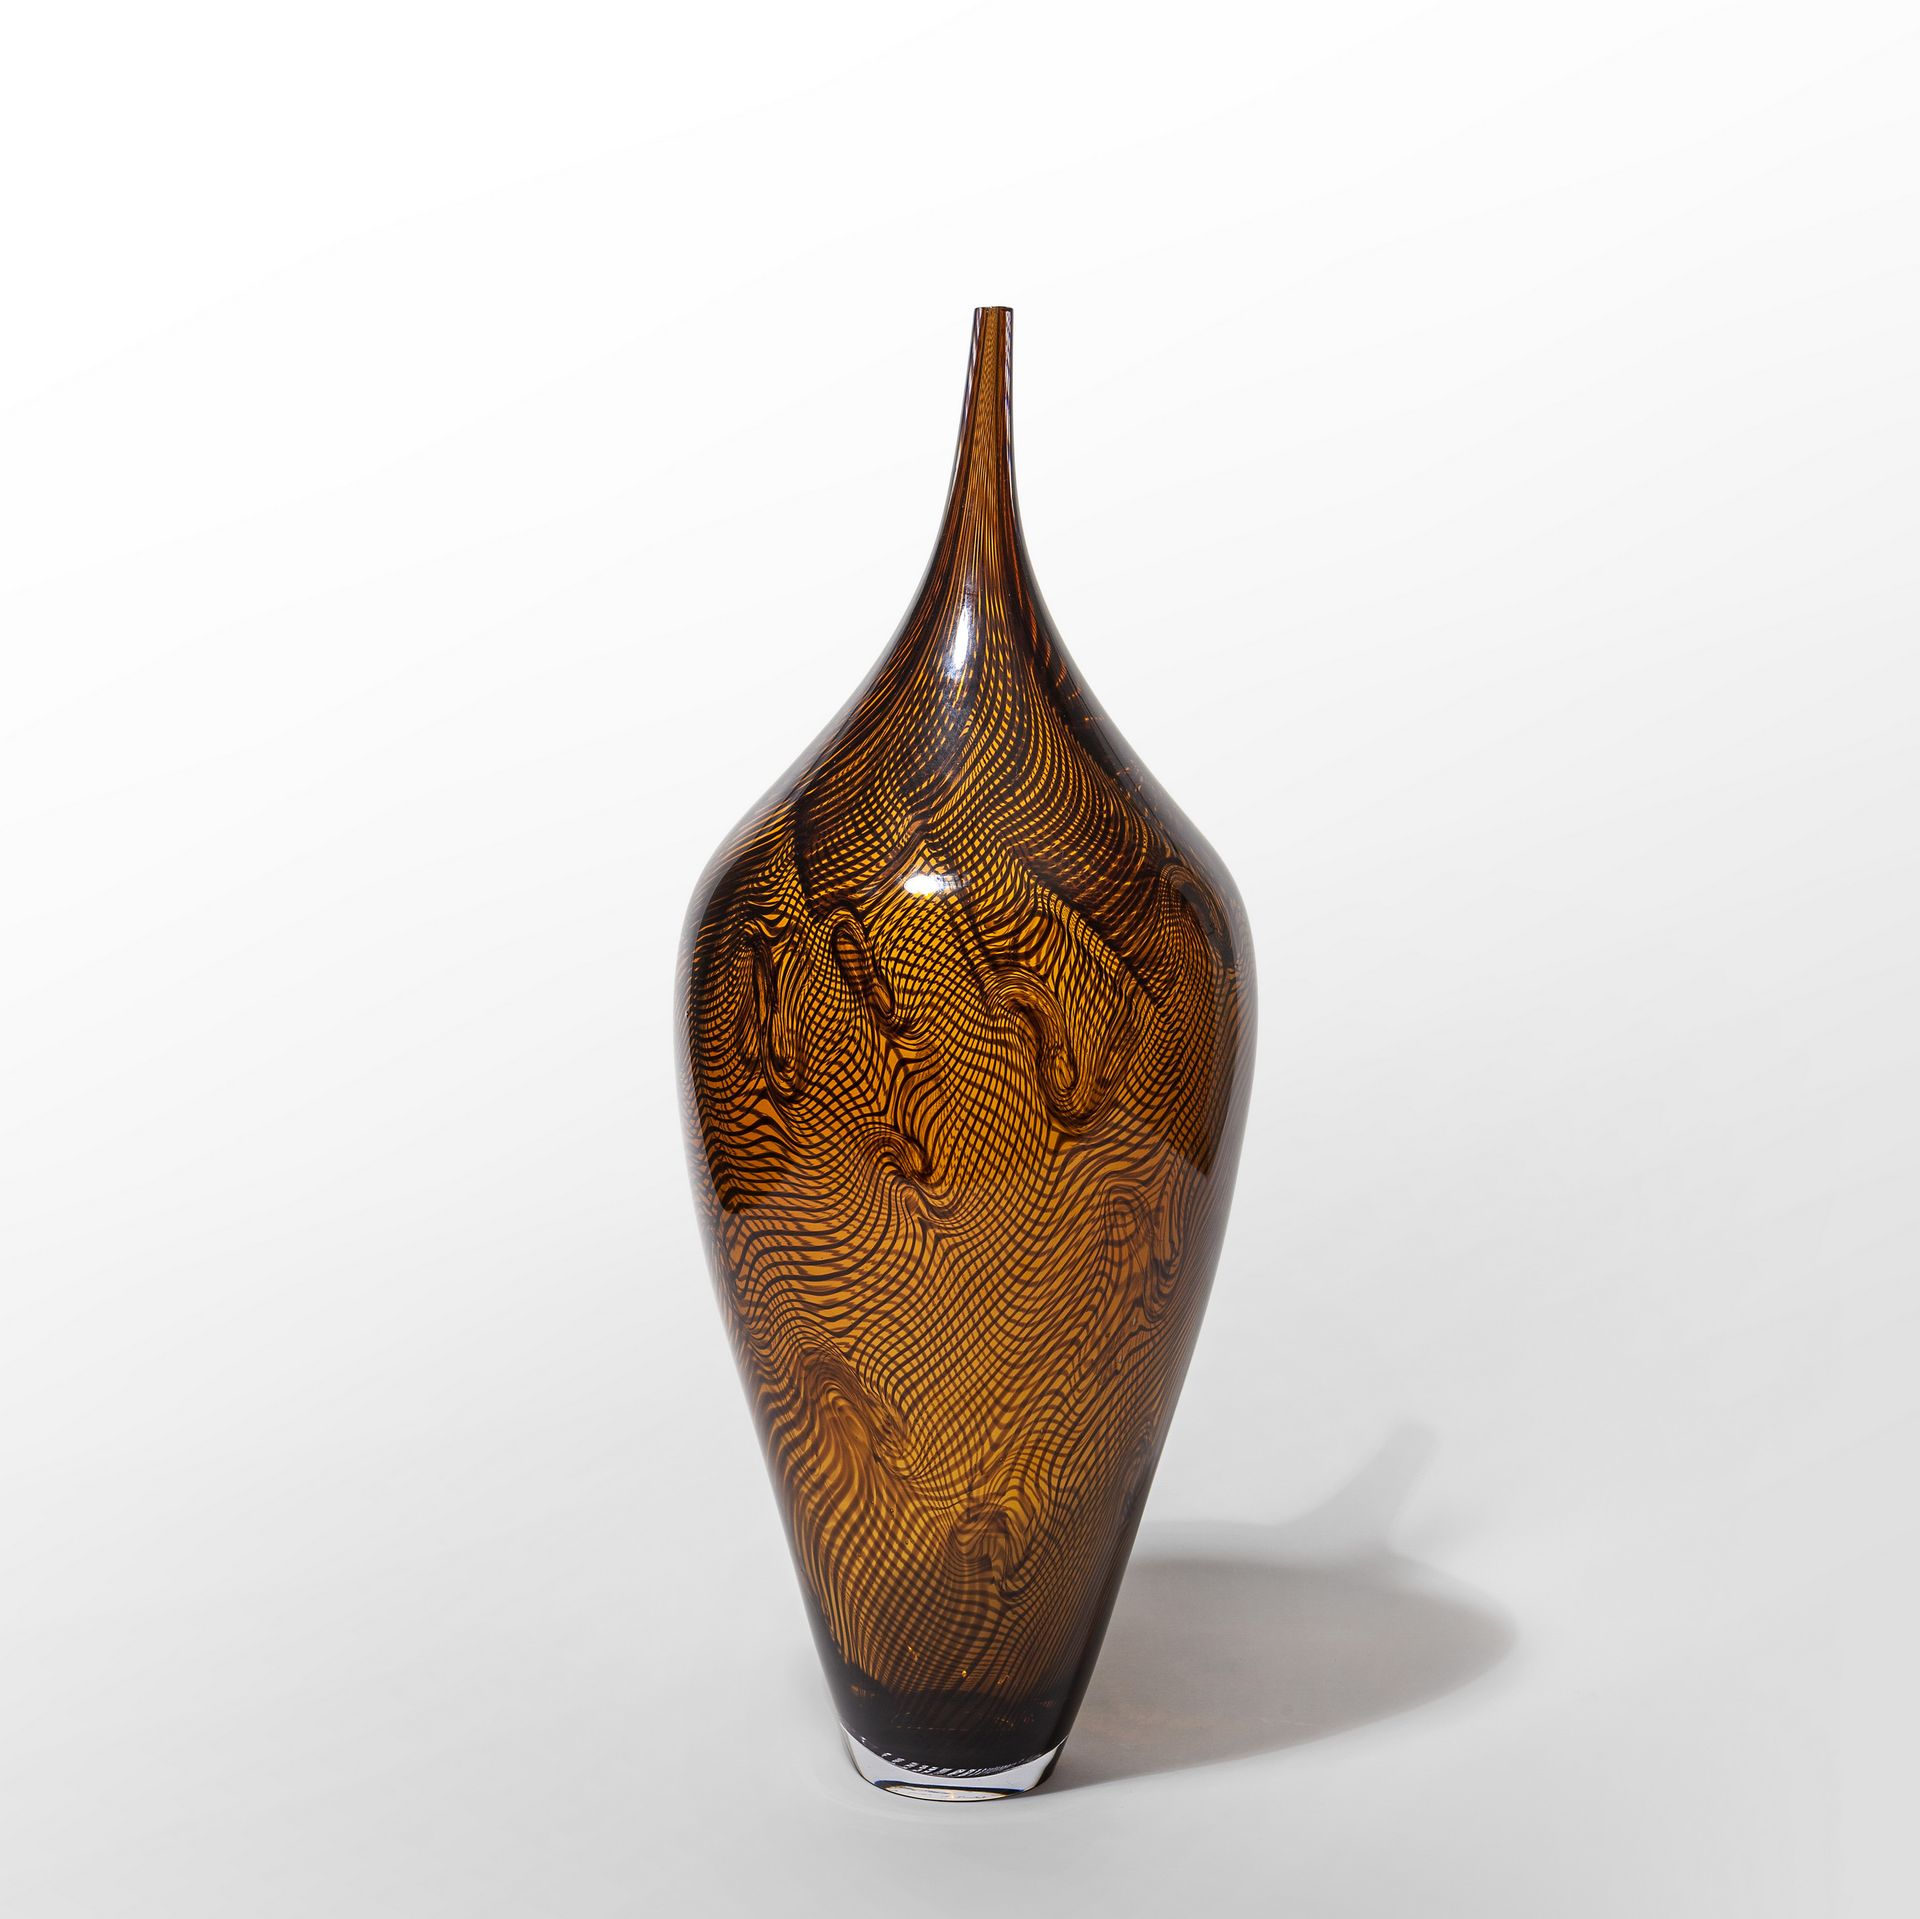 CELOTTO AFRO AFRO CELOTTO
A vase in amber glass and curved black filigree 2005 c&hellip;